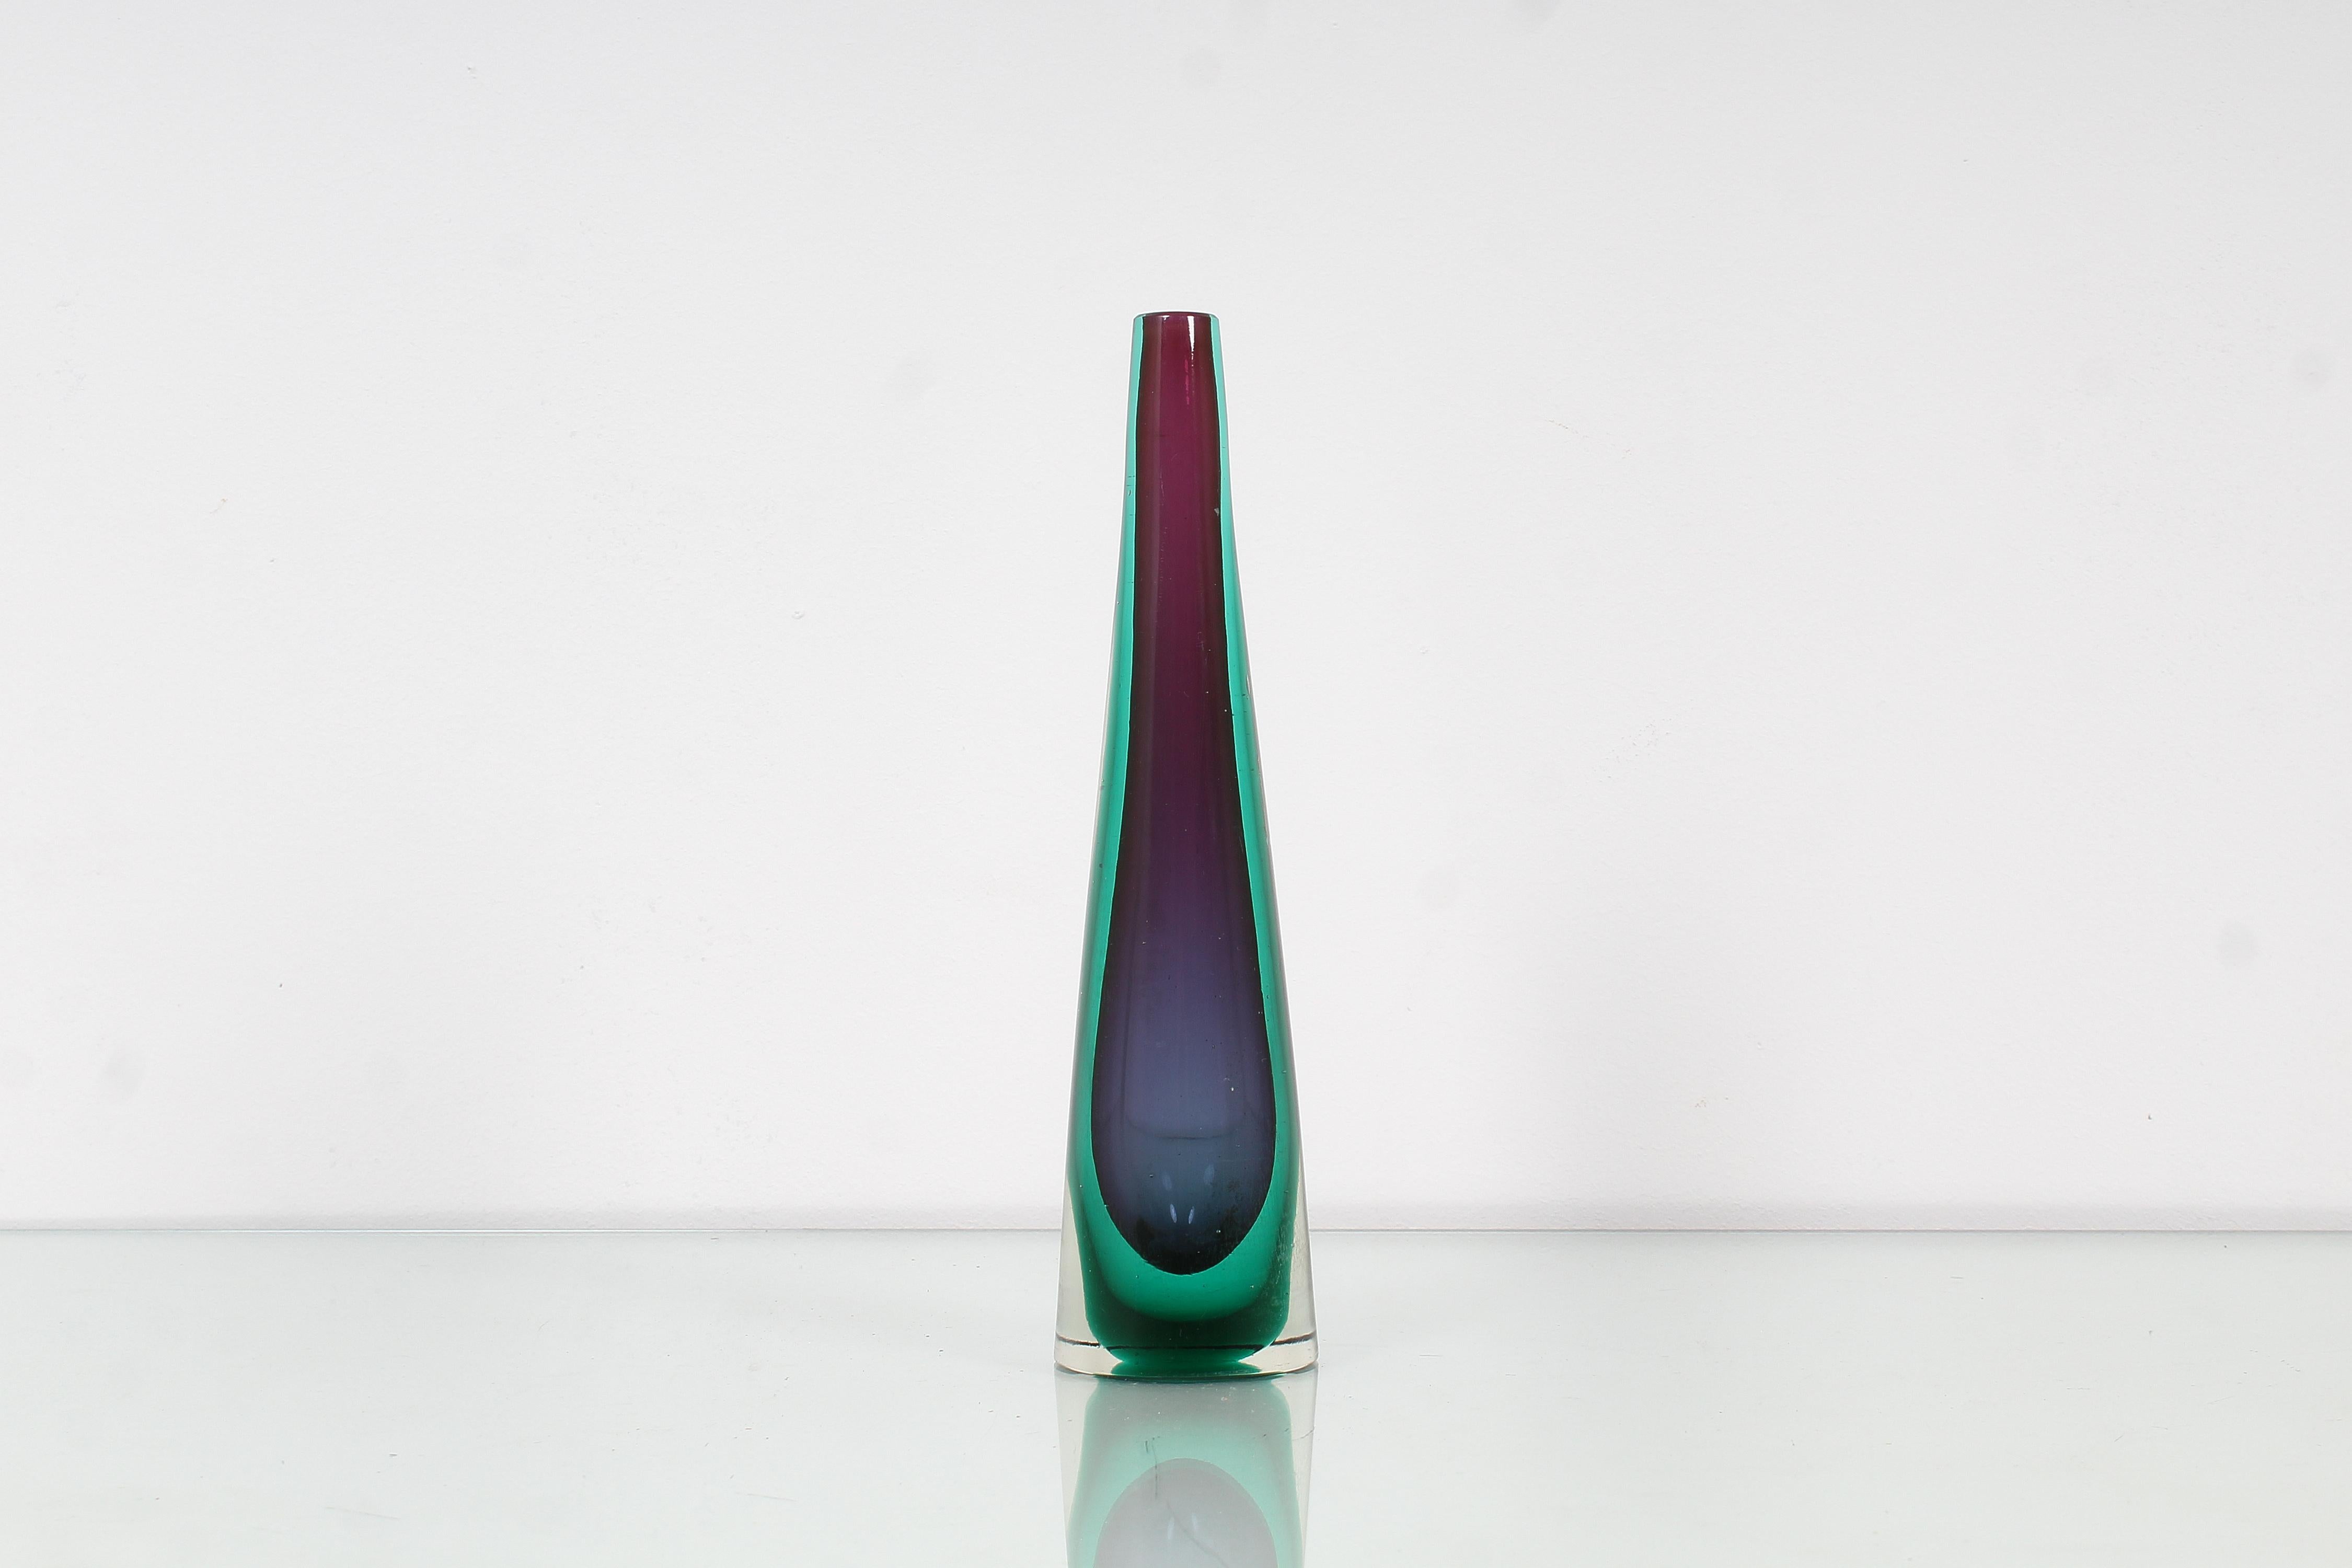 Refined single-flower vase with a conical shape in blue, purple and green submerged Murano glass. Attributed to Flavio Poli, Venice 1960s.
Wear consistent with age and use